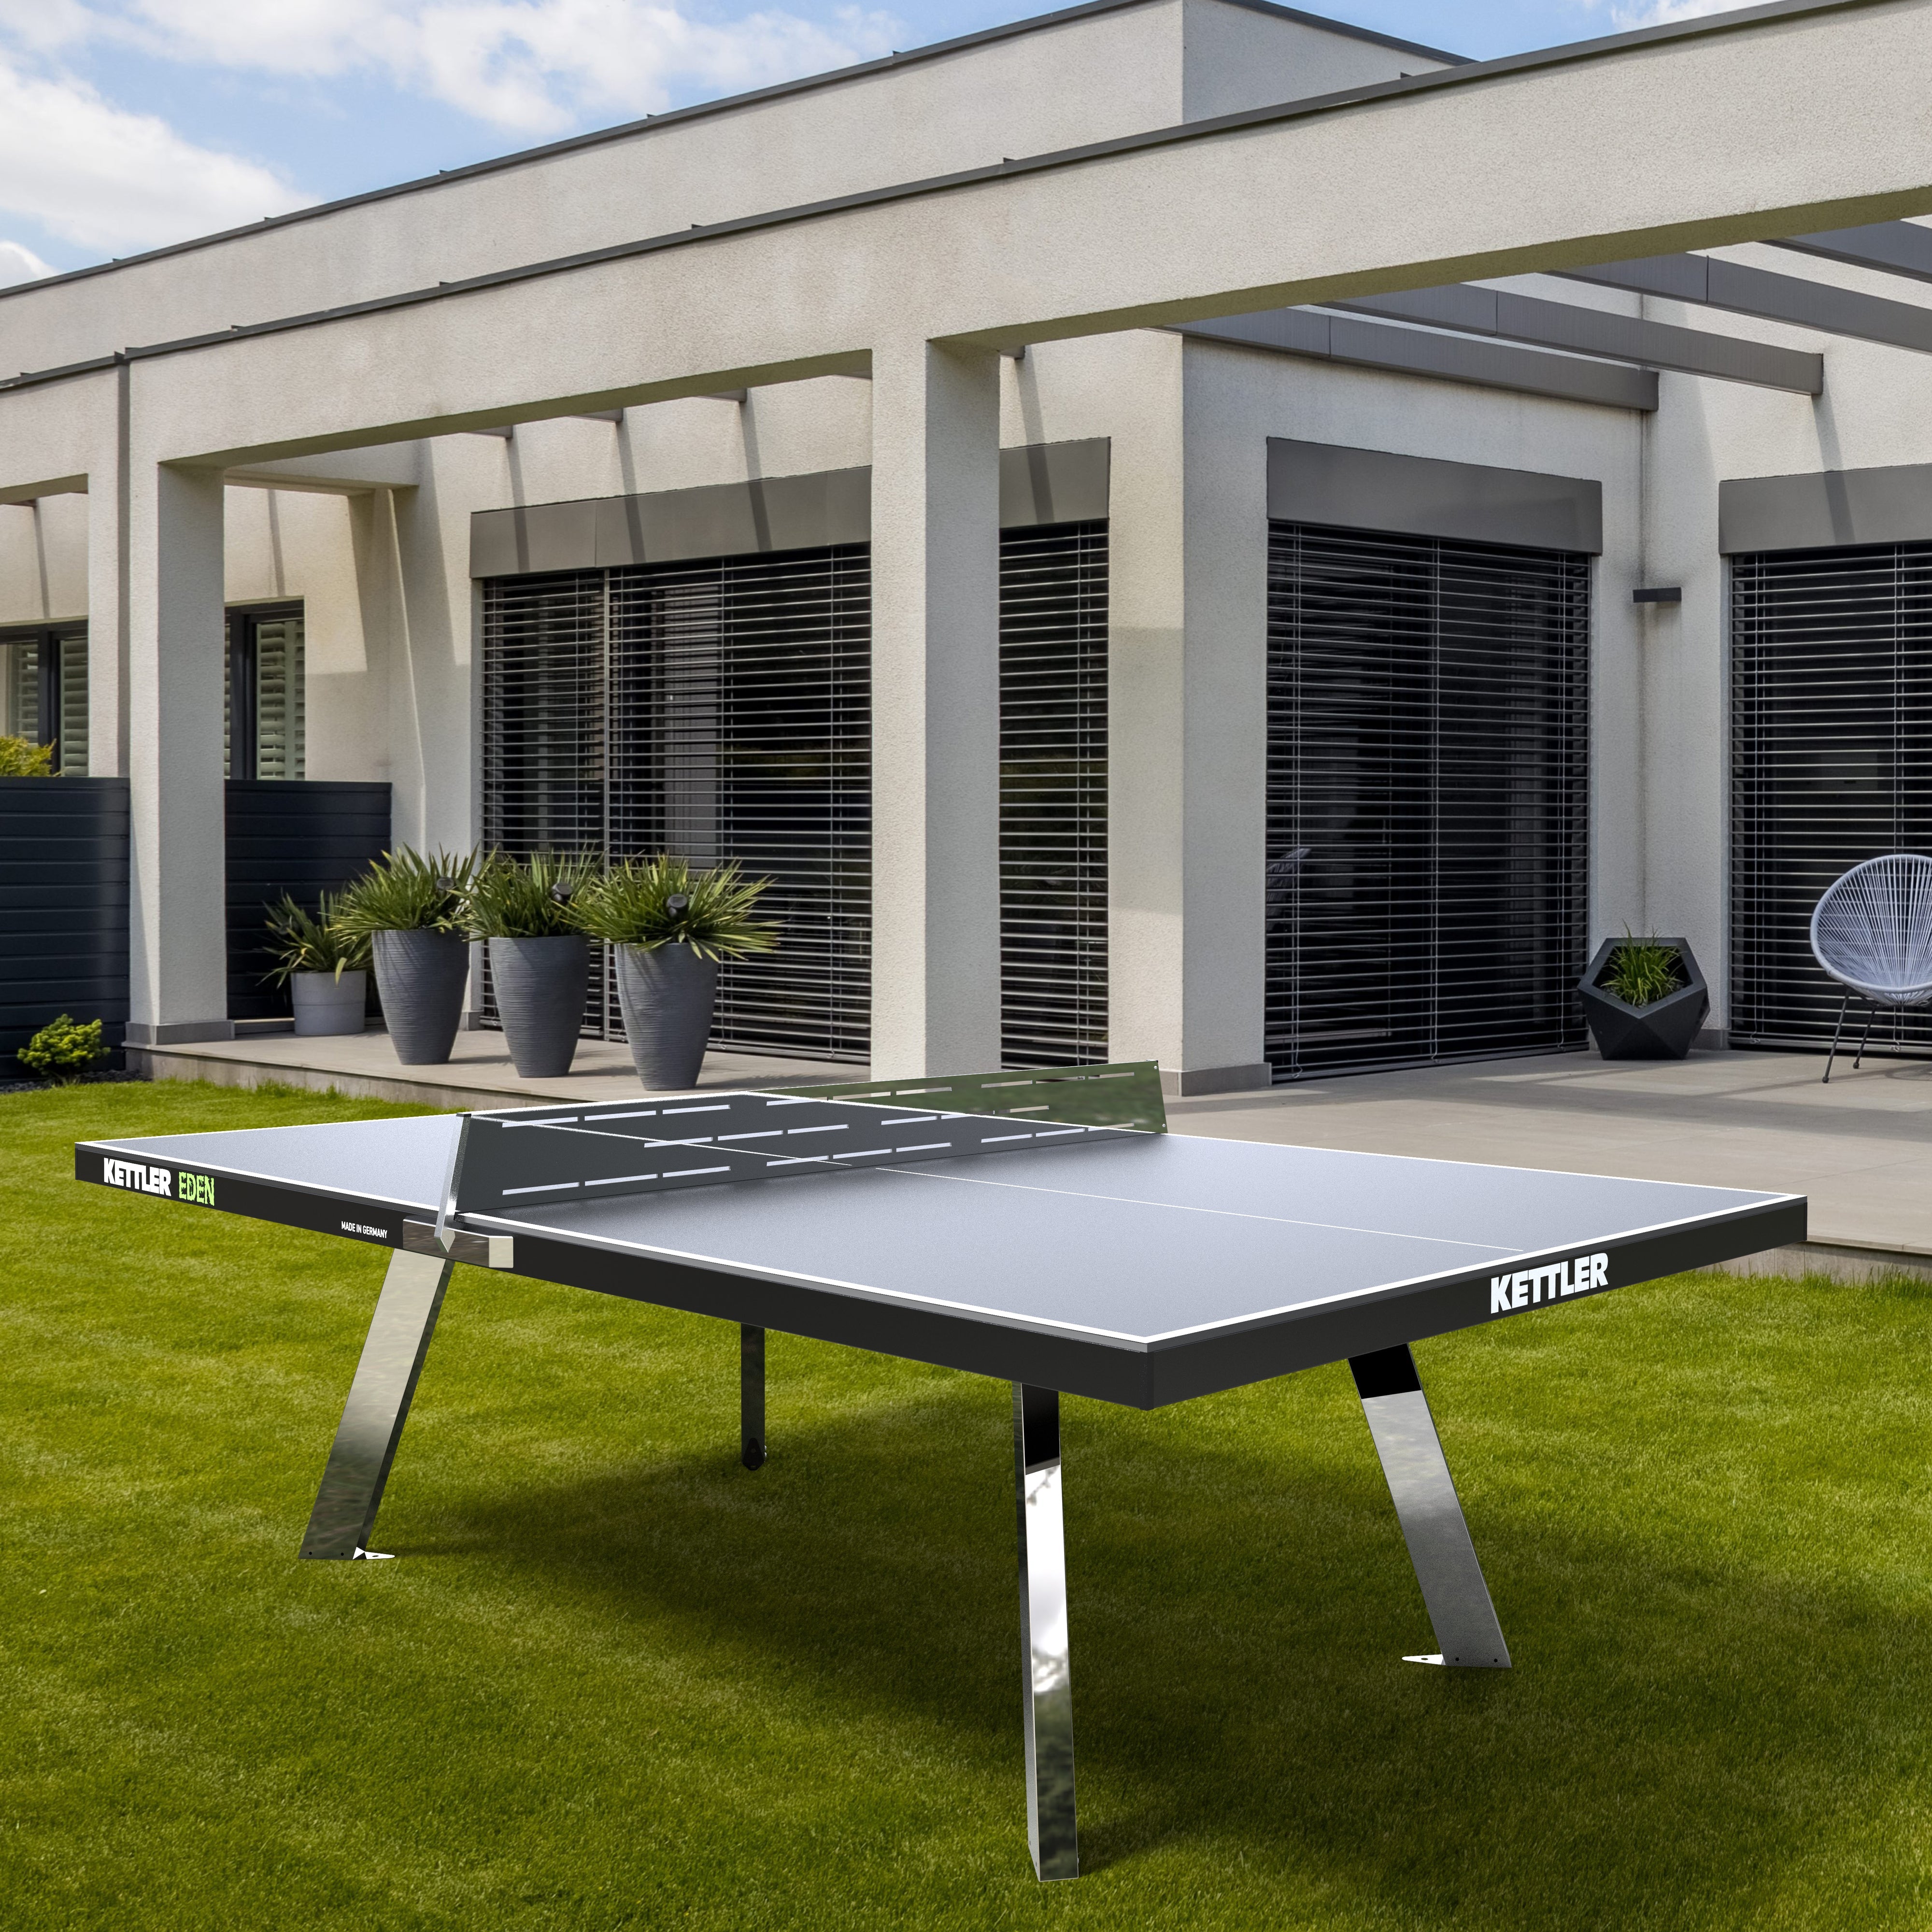 Lifestyle shot of stationary ping pong table in backyard 